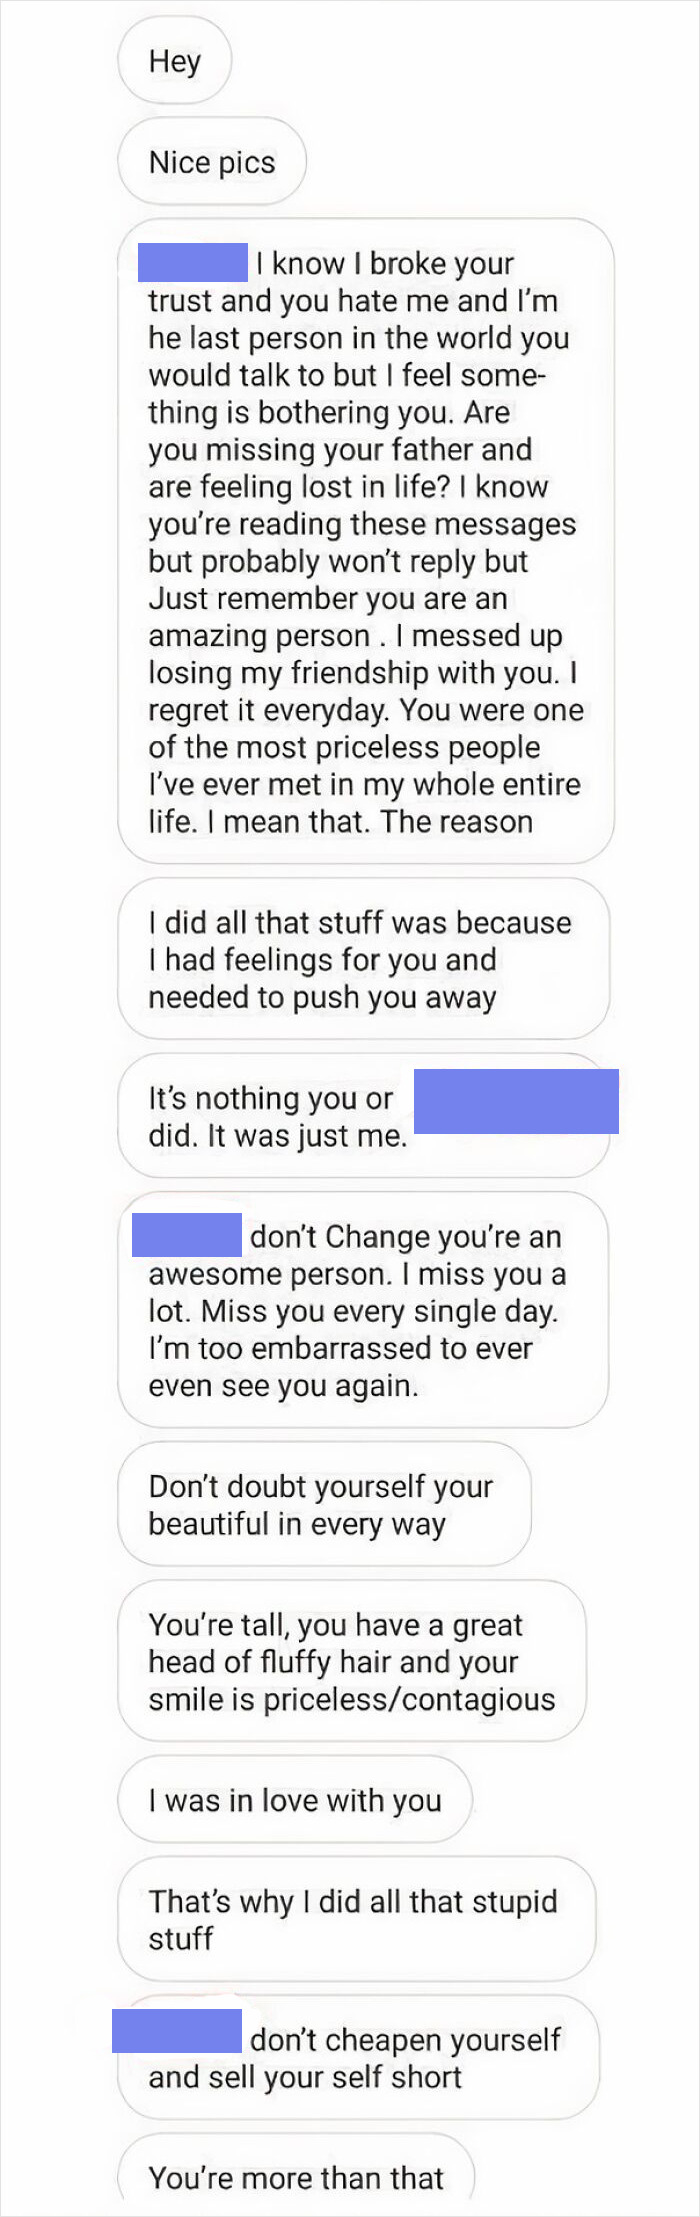 "I Still Consider You To Be My Friend Even Though You Hate Me And Don't Consider Me A Friend"-My Friend's Stalker Of 5 Years